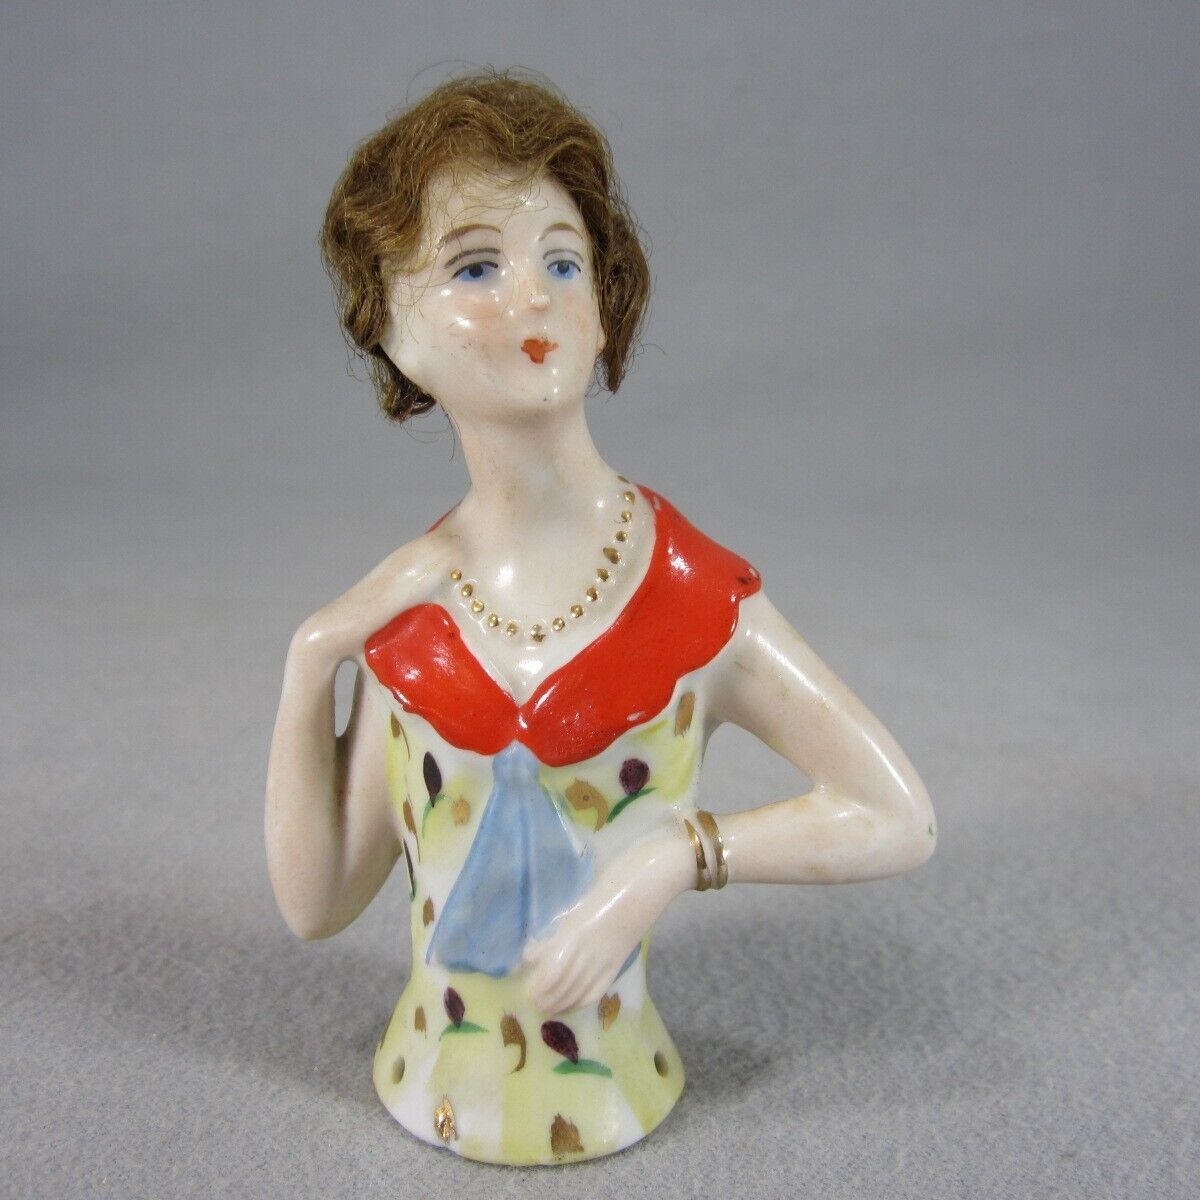 German Porcelain Pin Cushion Half Doll with Necklace & Arms Away & Real Hair Wig